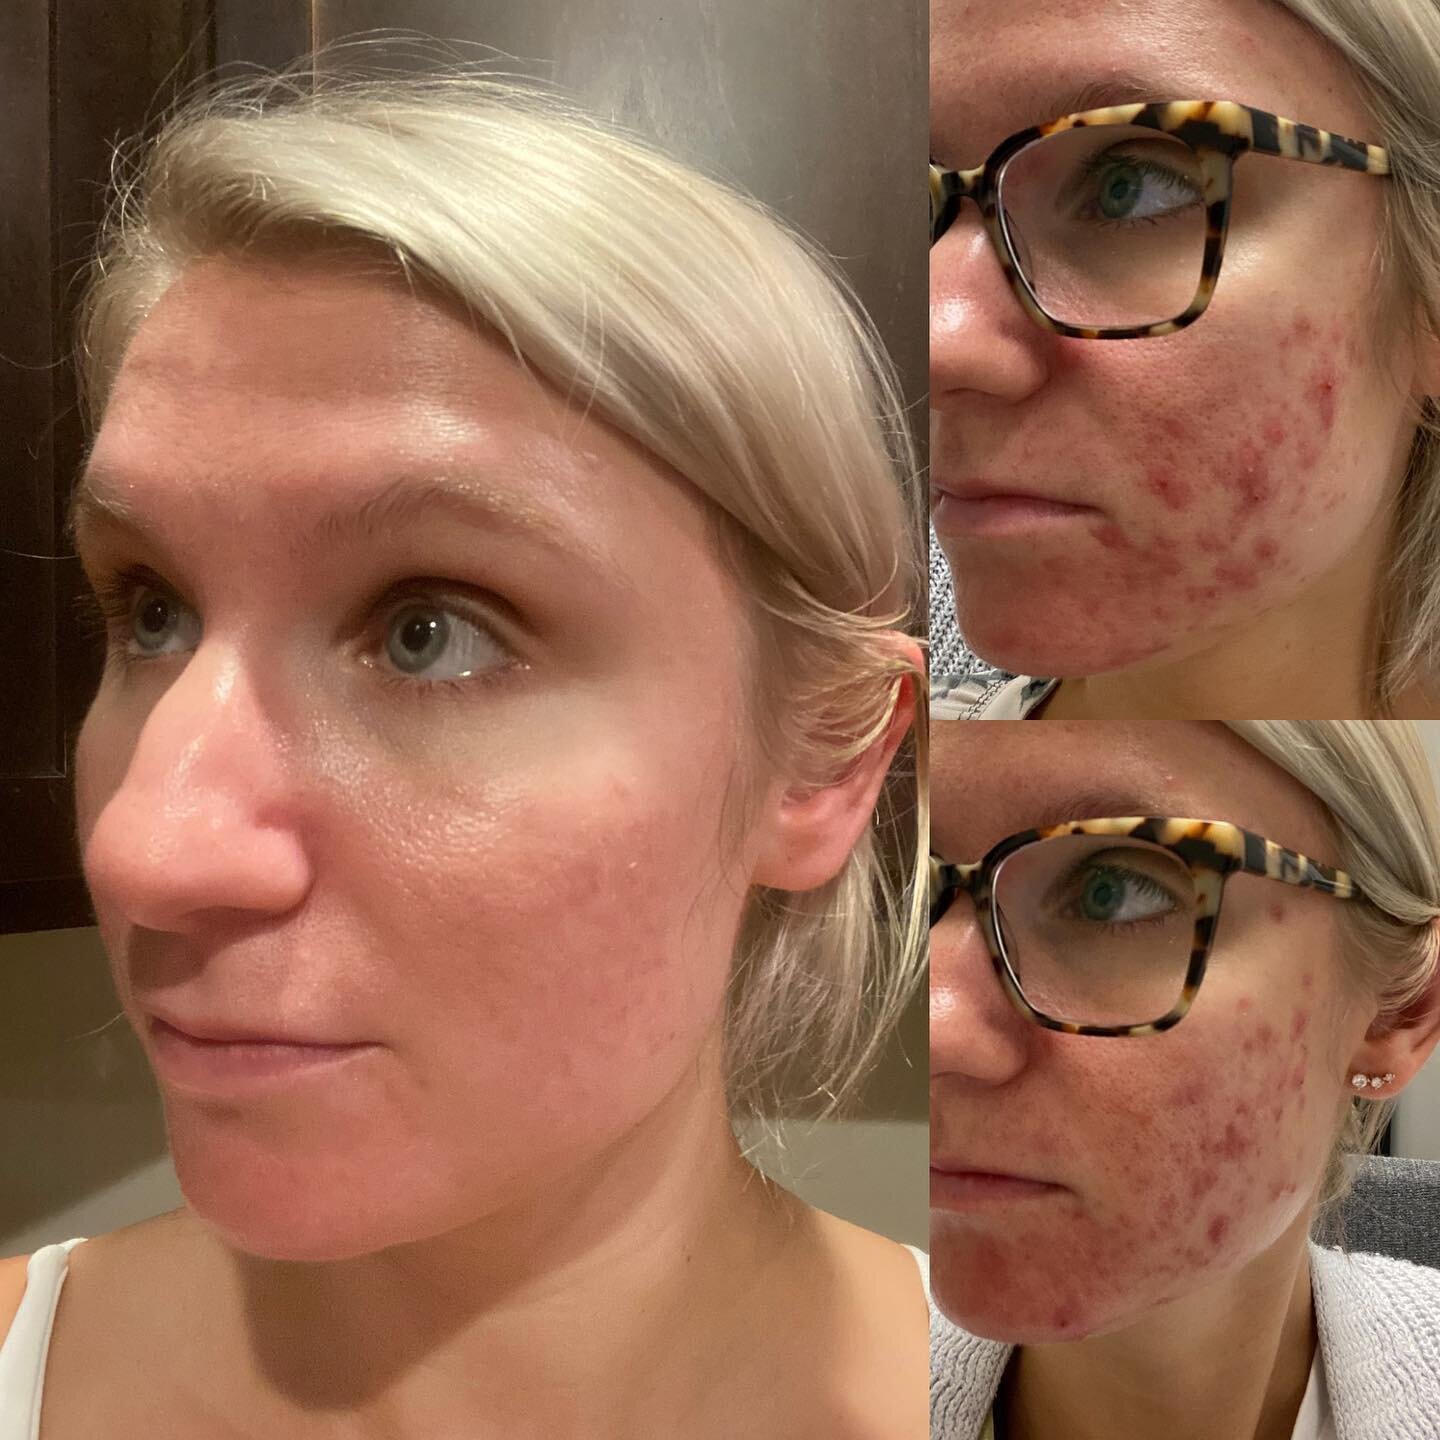 ✨Healing skin one glowy bitch at a time over here!✨

An estie bestie + Face Reality skincare = best skin of your life!

Acne really sucks. There are so many factors for why people struggle with acne &hellip;.from genetics, to diet &amp; gut health, h